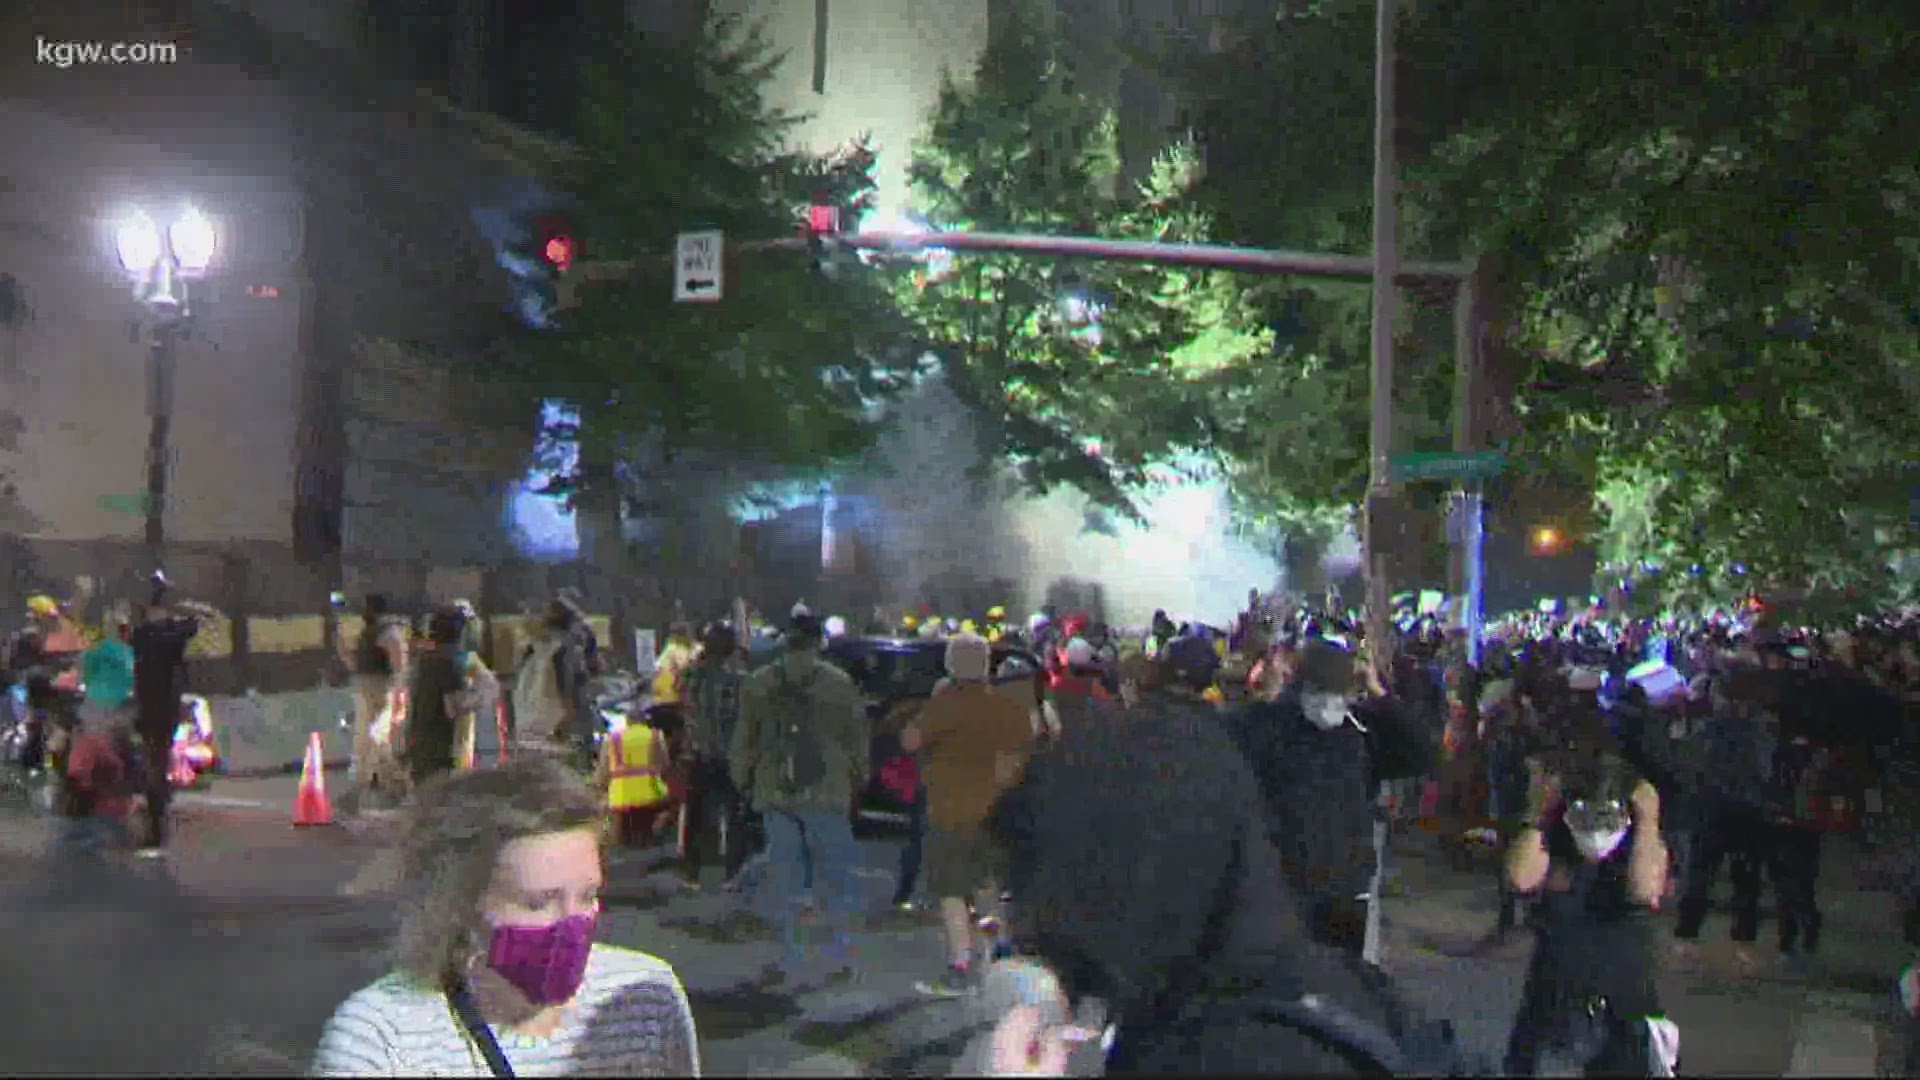 In the early morning hours, federal officers in Portland used tear gas, flash bangs and less lethal rounds to push protesters away from the courthouse.